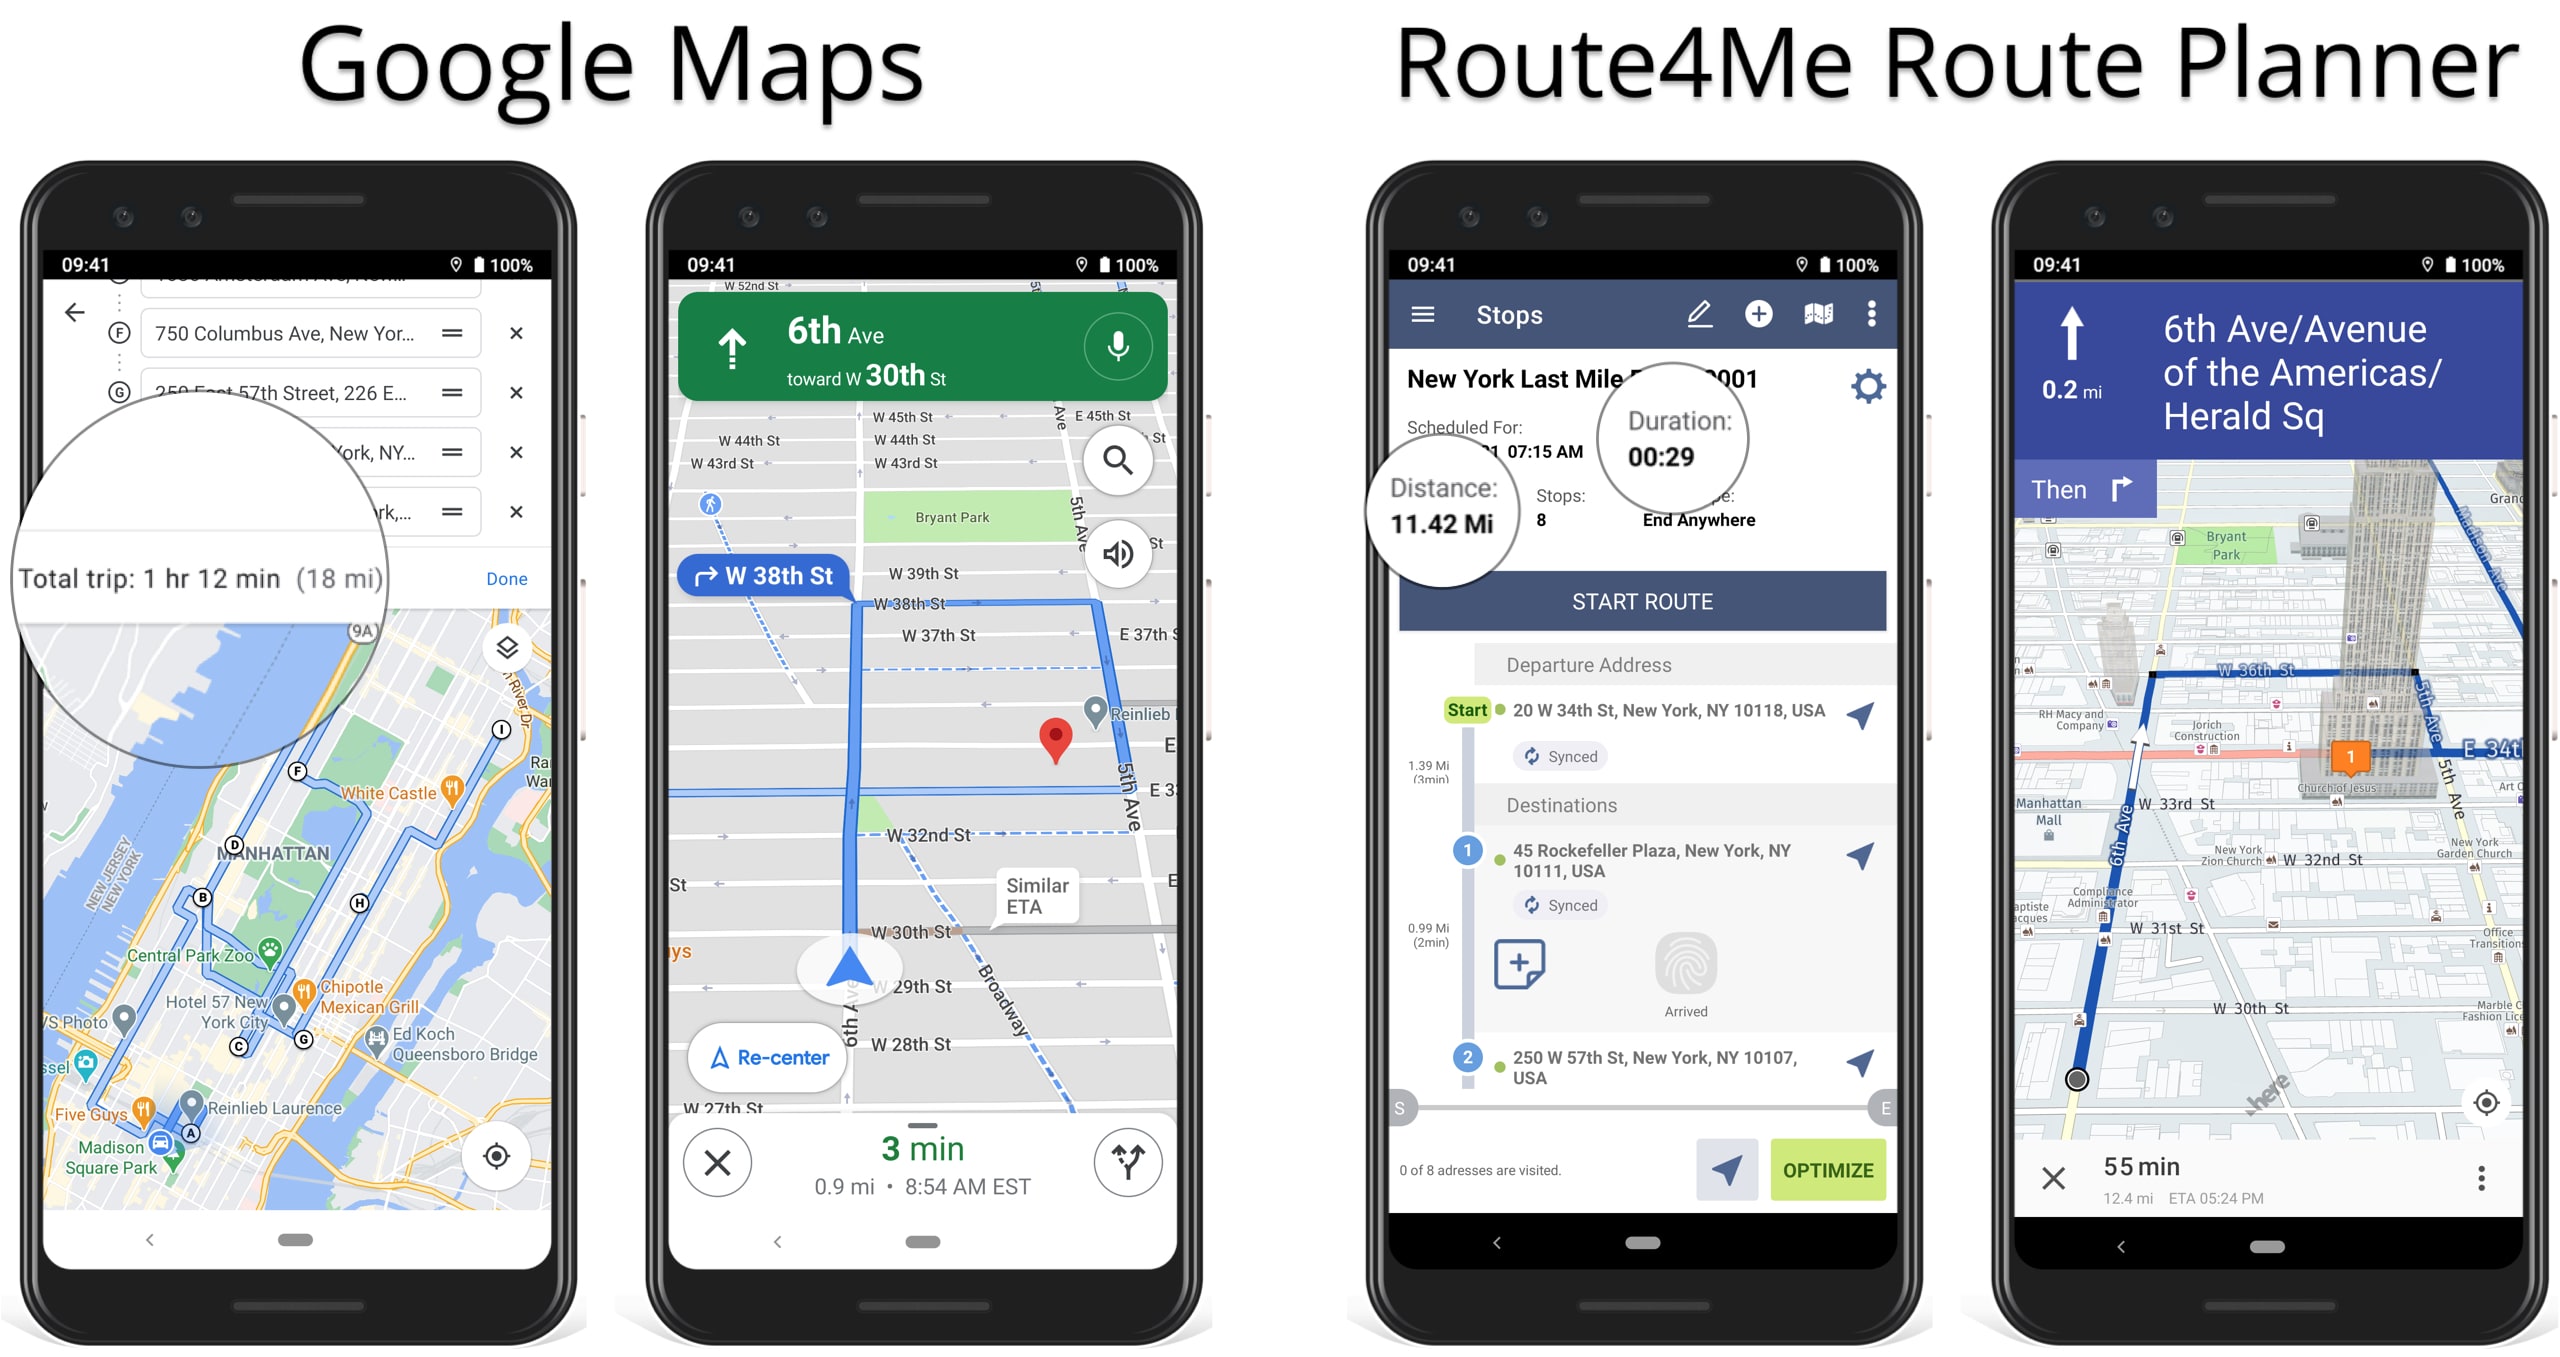 Switch from Google routing on the Google Maps route planner to Route4Me route planning software.